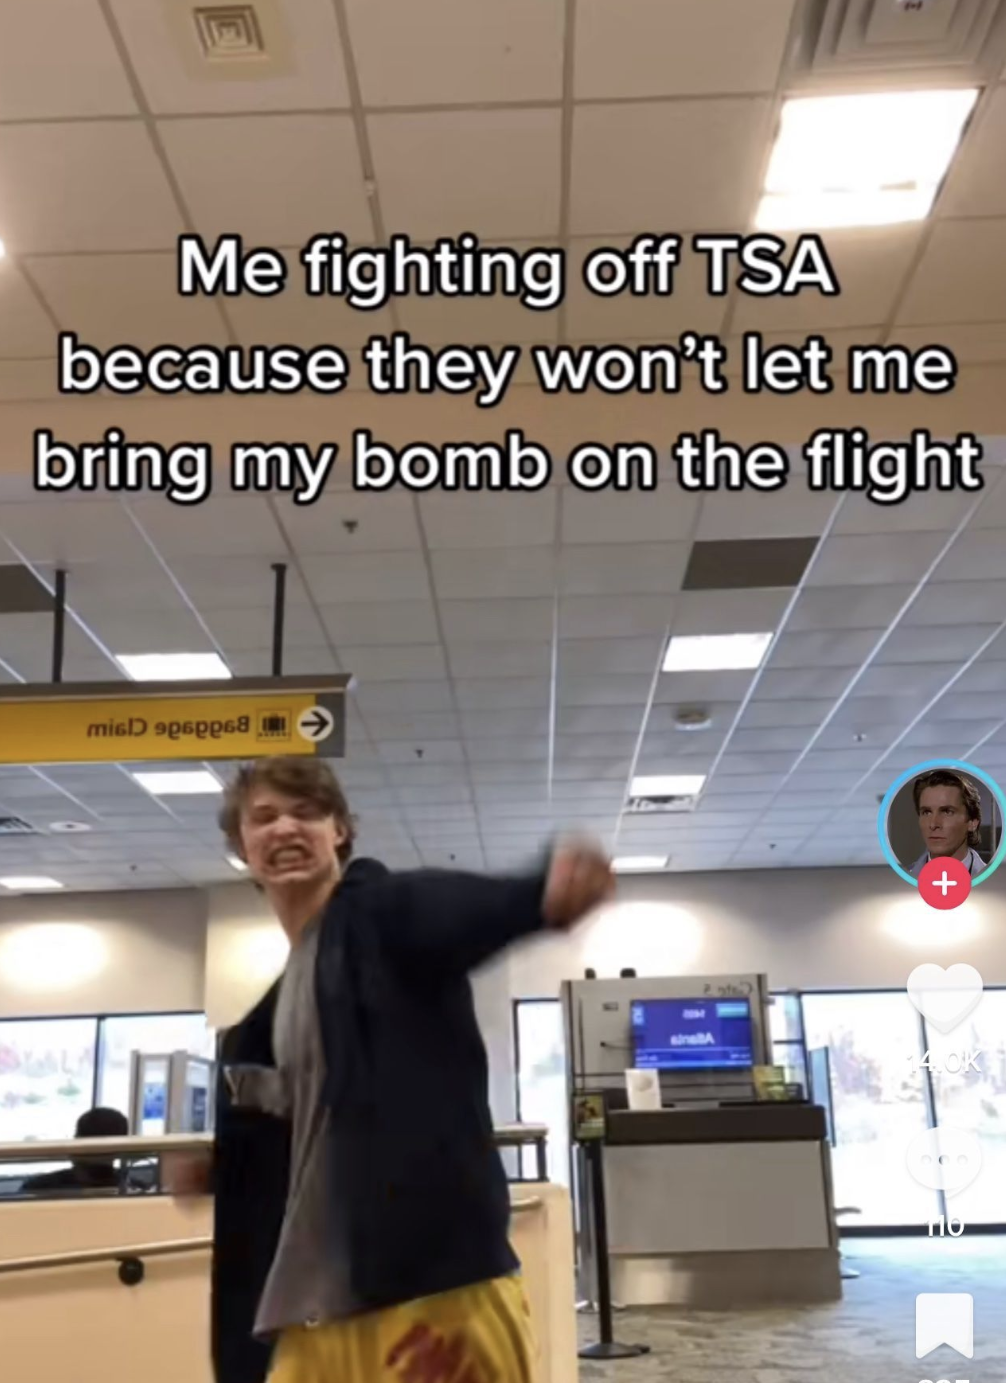 ceiling - E Me fighting off Tsa because they won't let me bring my bomb on the flight